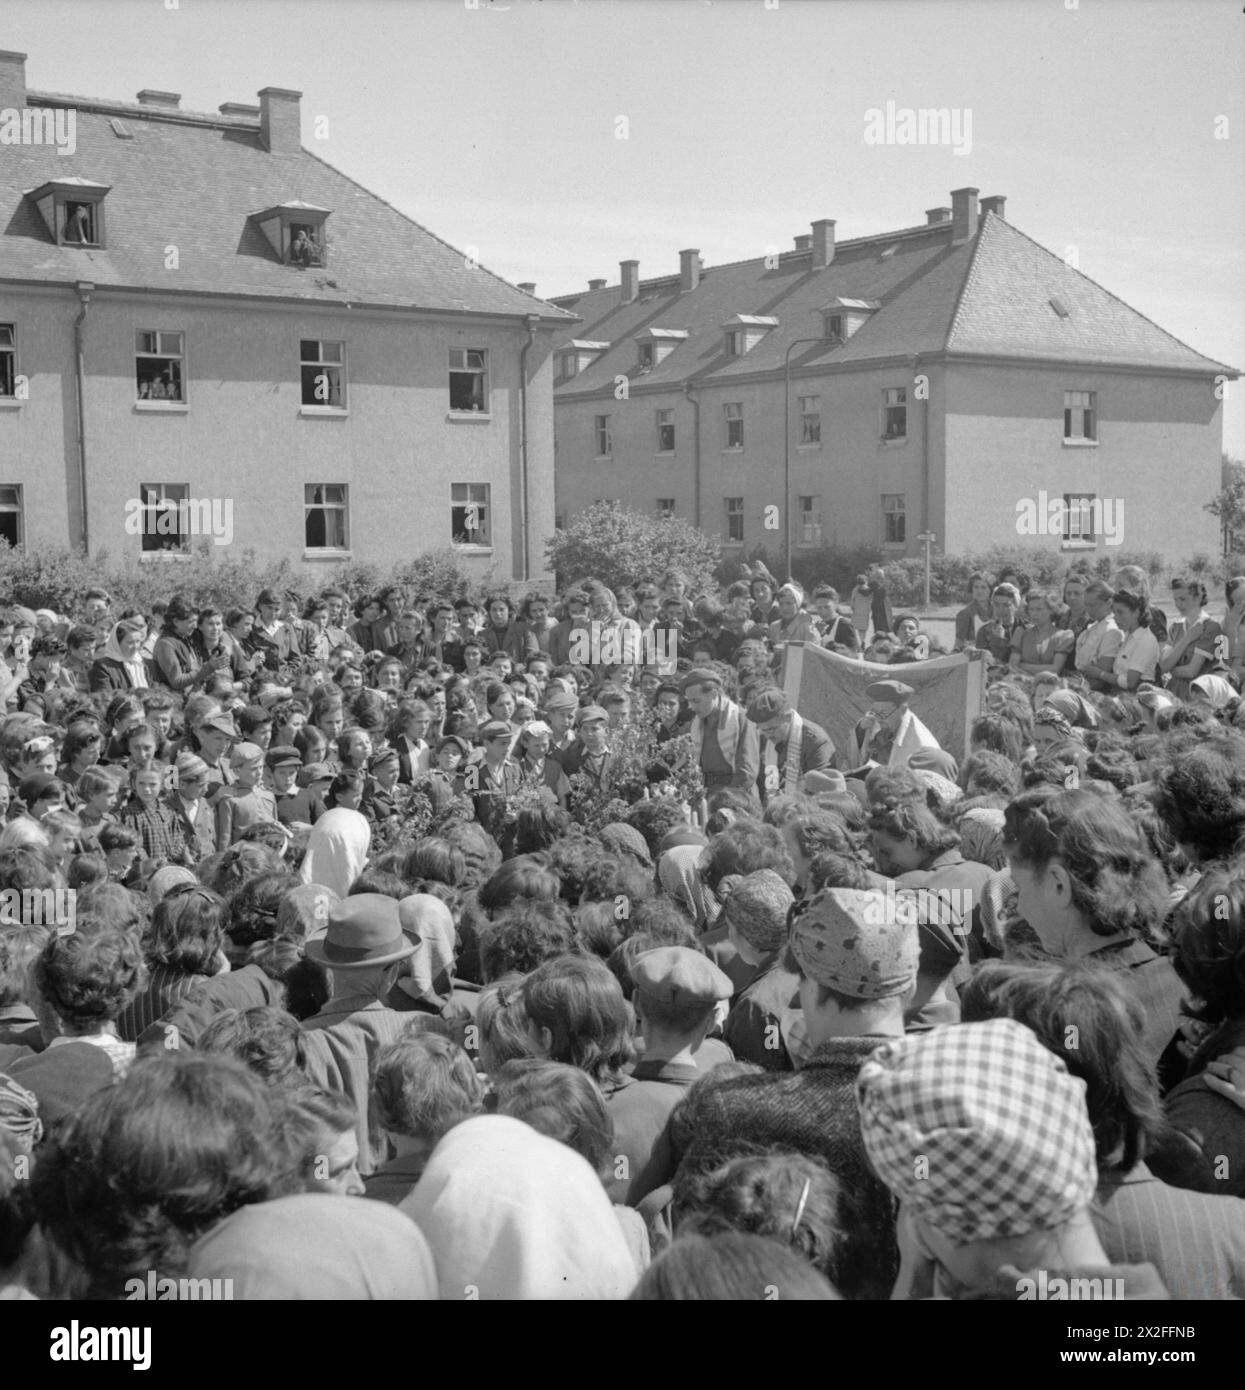 THE LIBERATION OF BERGEN-BELSEN CONCENTRATION CAMP, MAY 1945 - Jewish camp inmates hold an open air service to celebrate the Jewish Summer Festival of Thanksgiving. The service was led by Rev Leslie H Hardman, Senior Jewish Chaplain to the British 2nd Army, and former camp inmates, Rabbi H Helfgott of Jugoslovia and Rabbi B Goldfinger of Poland. Behind the open air altar internees hold up a tapestry originally owned by the Jewish community in Sicily, which was brought into the camp and hidden by internees until liberation British Army, Royal Army Chaplains' Department Stock Photo